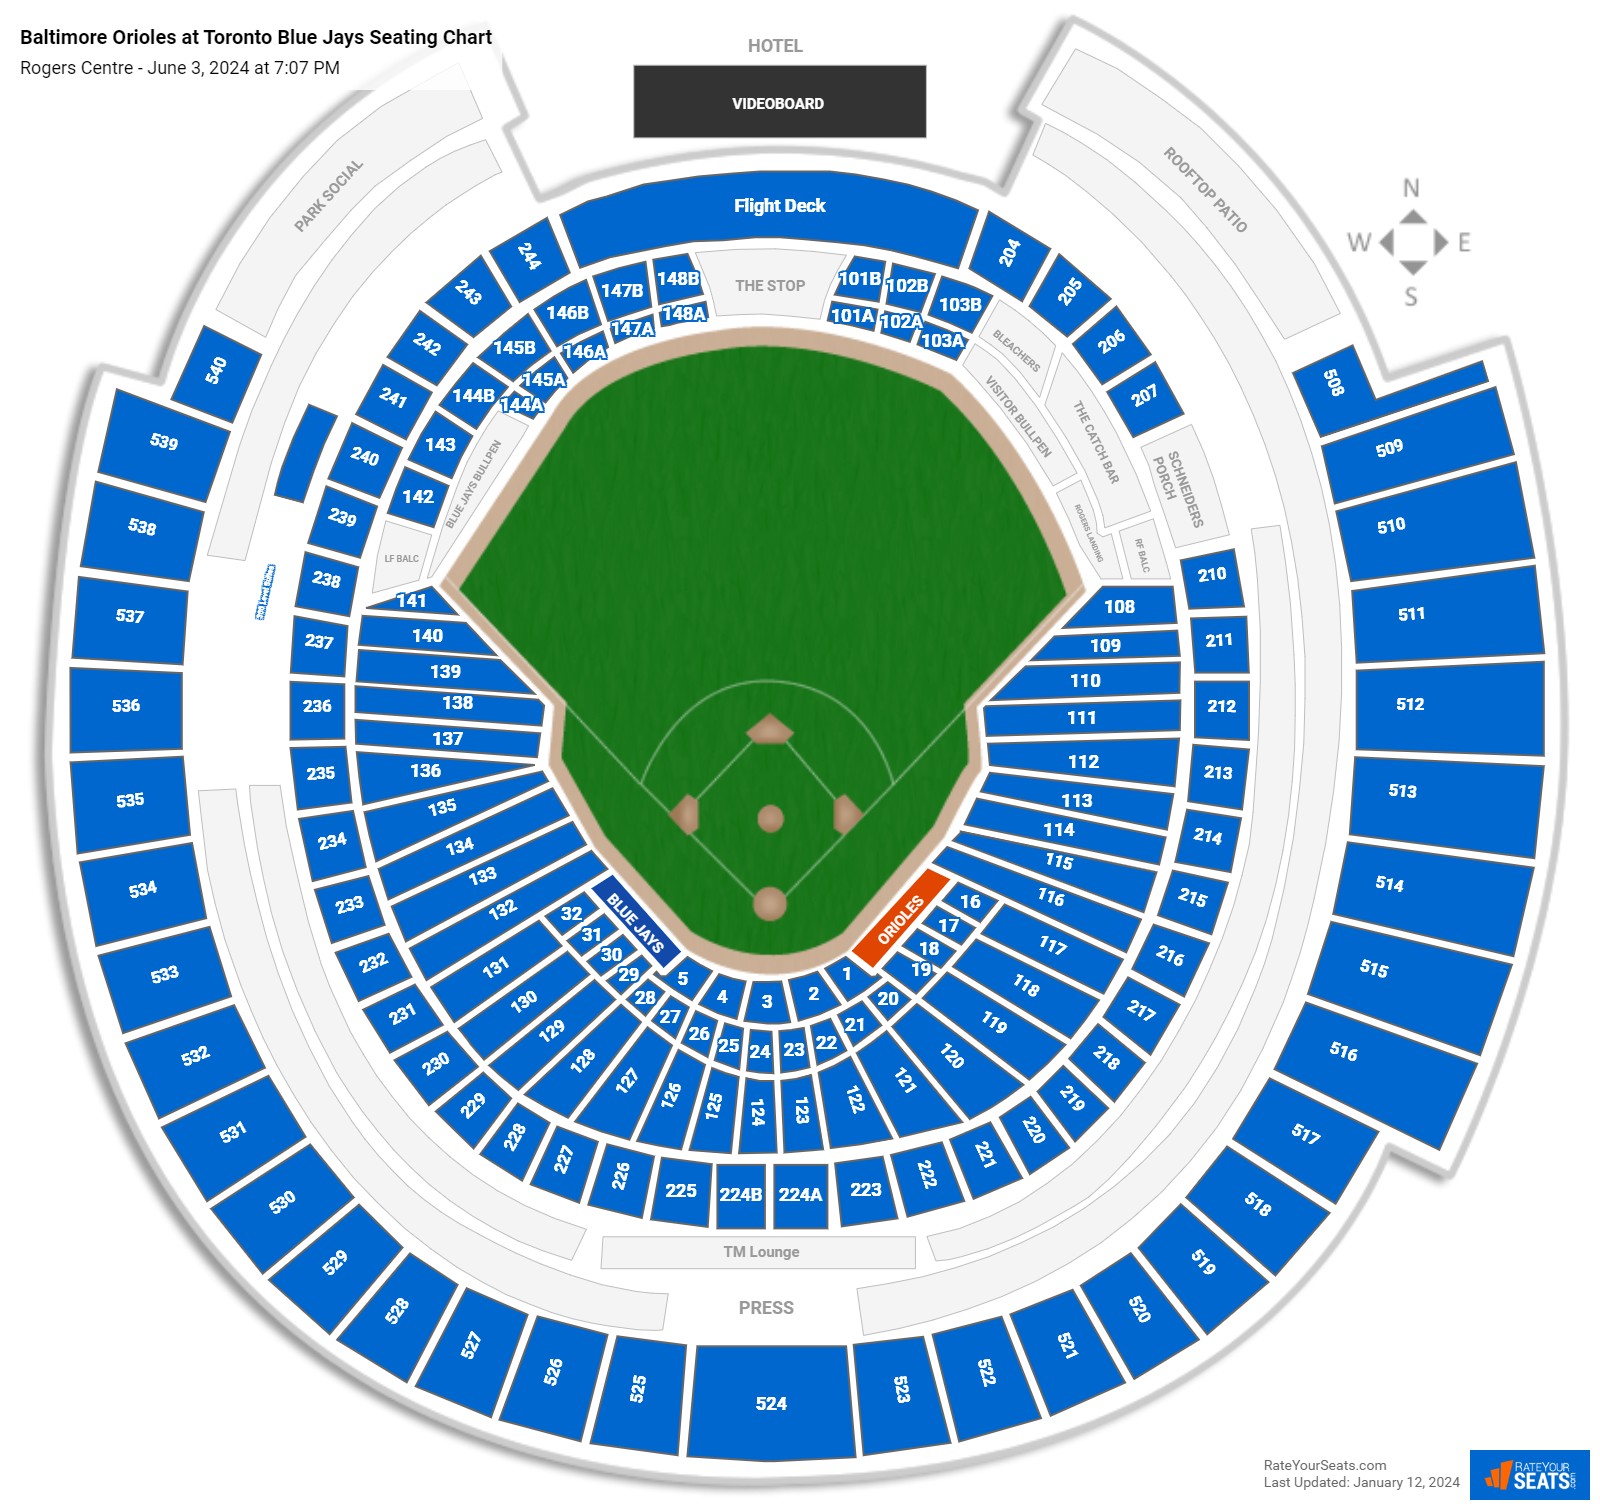 Rogers Centre Concert Seating Chart Rateyourseats Com